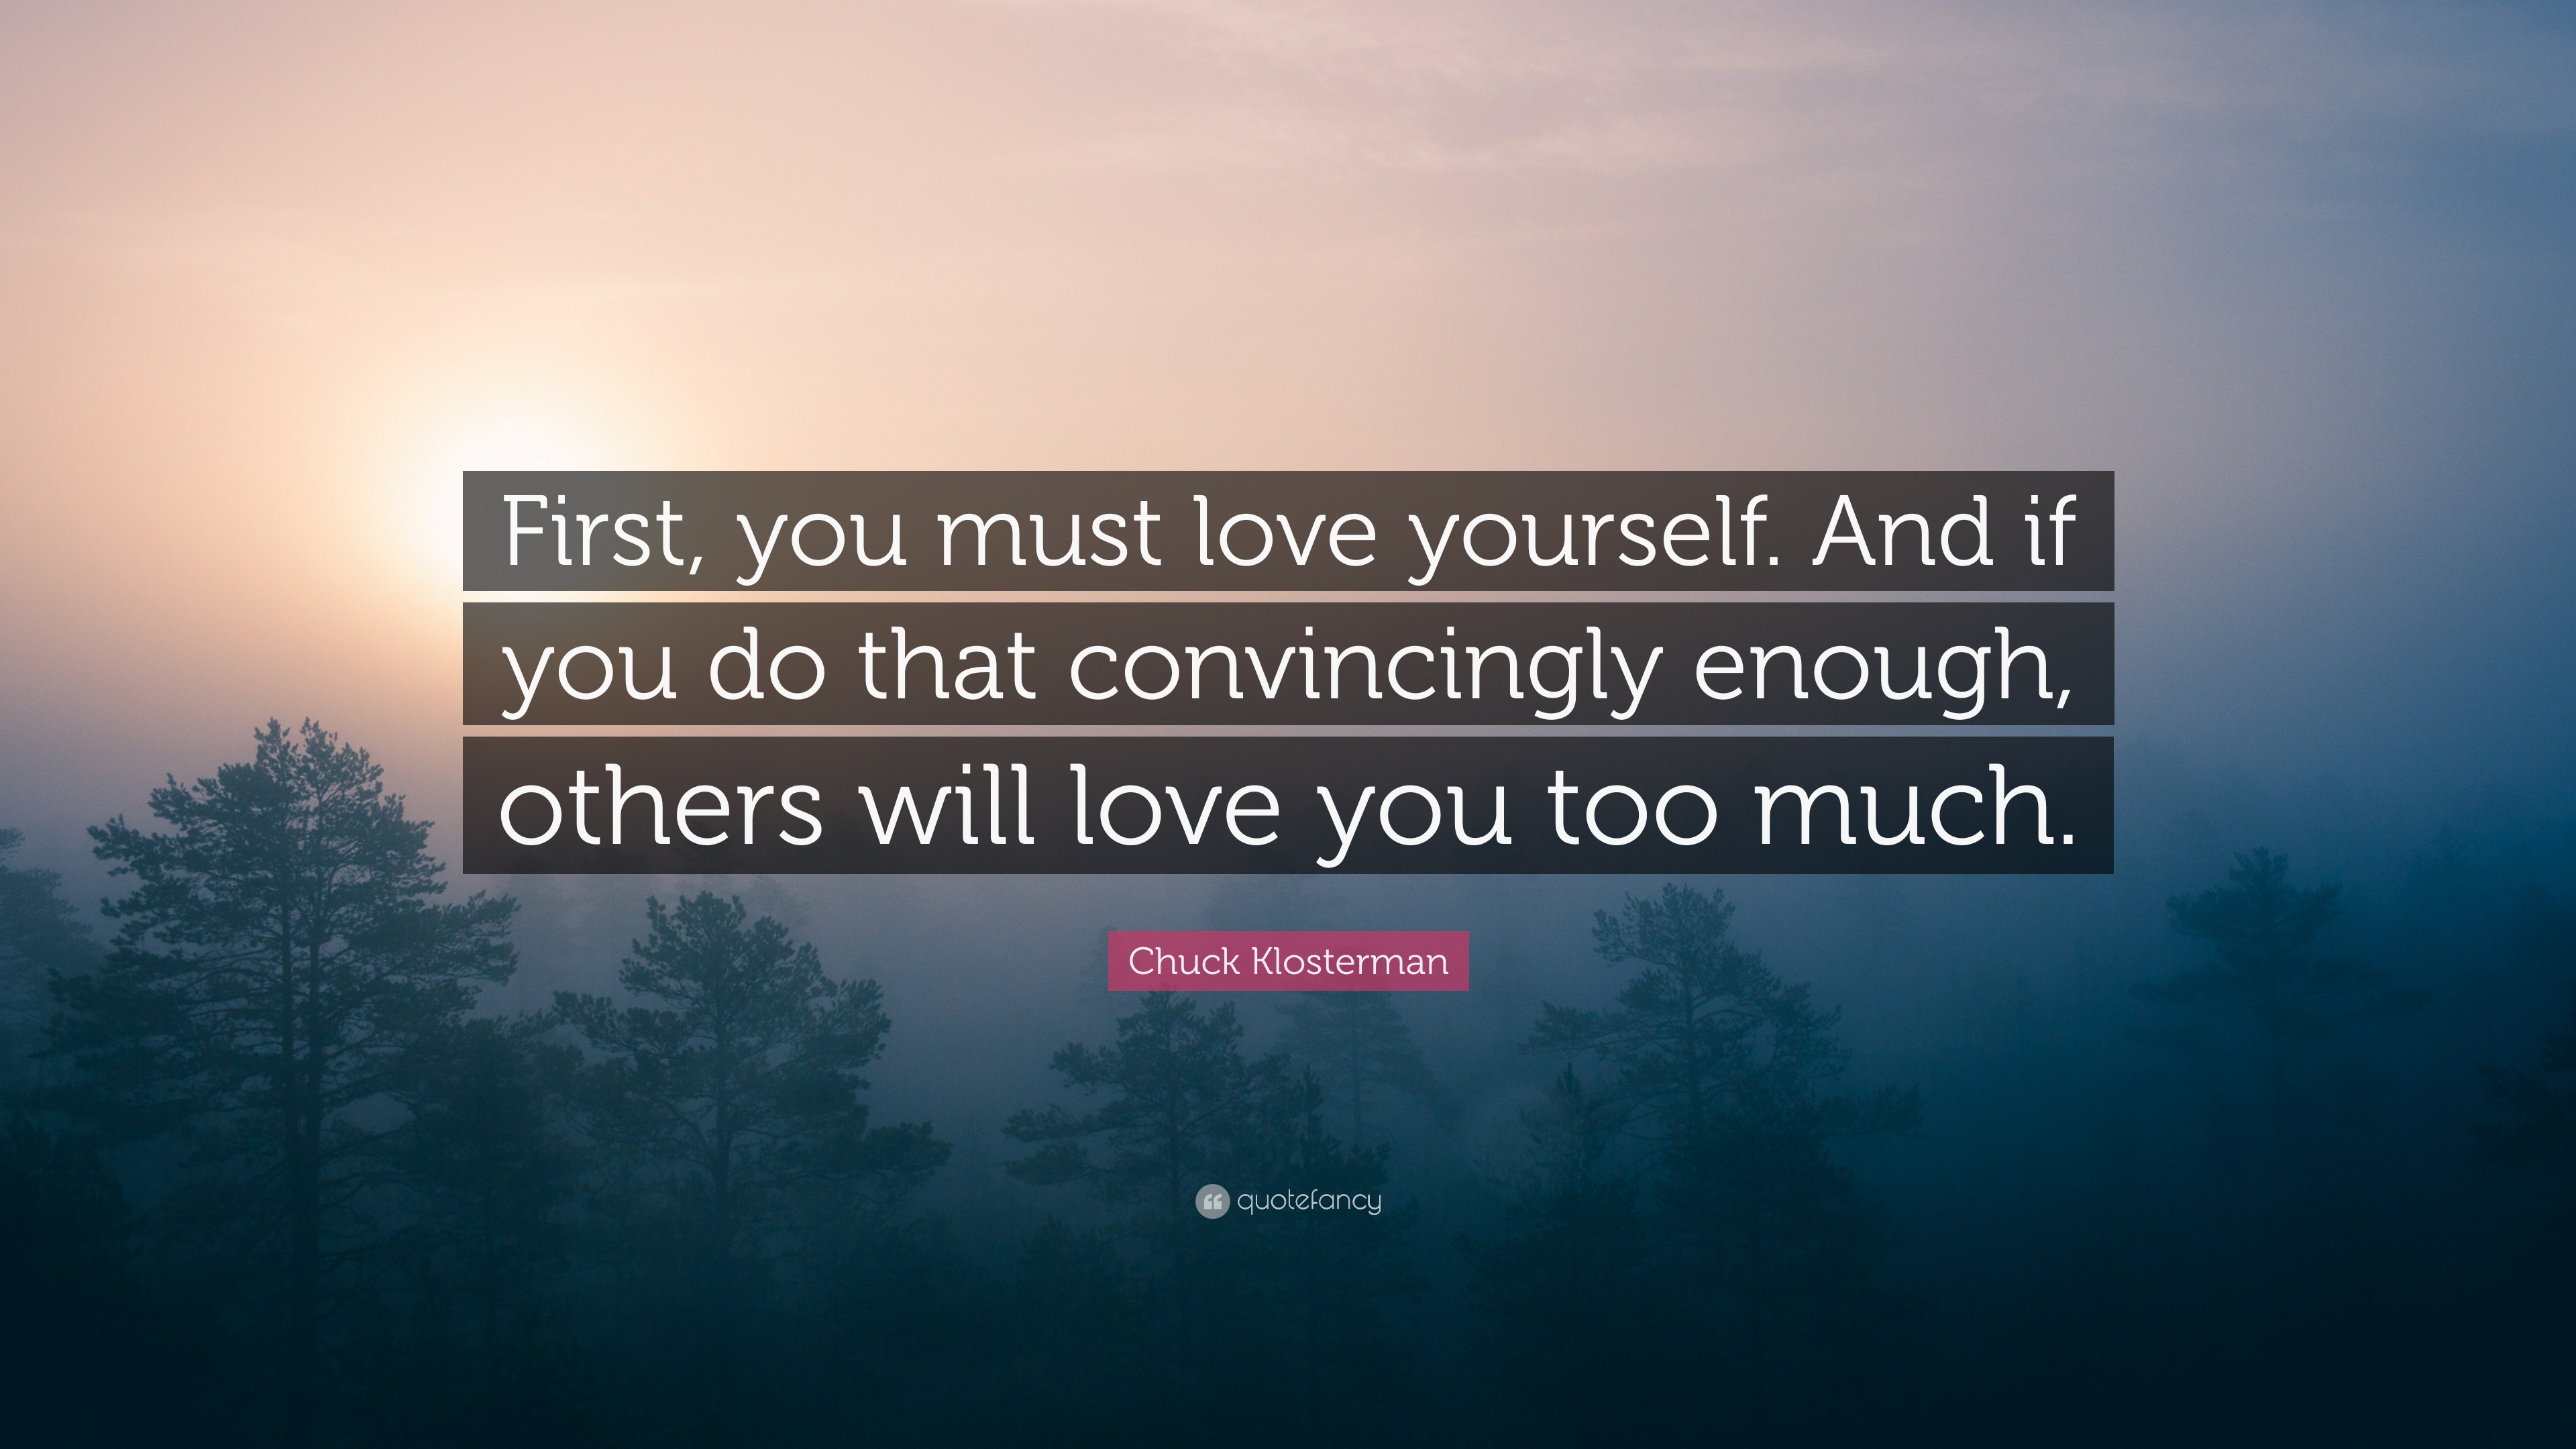 Chuck Klosterman Quote “First you must love yourself And if you do